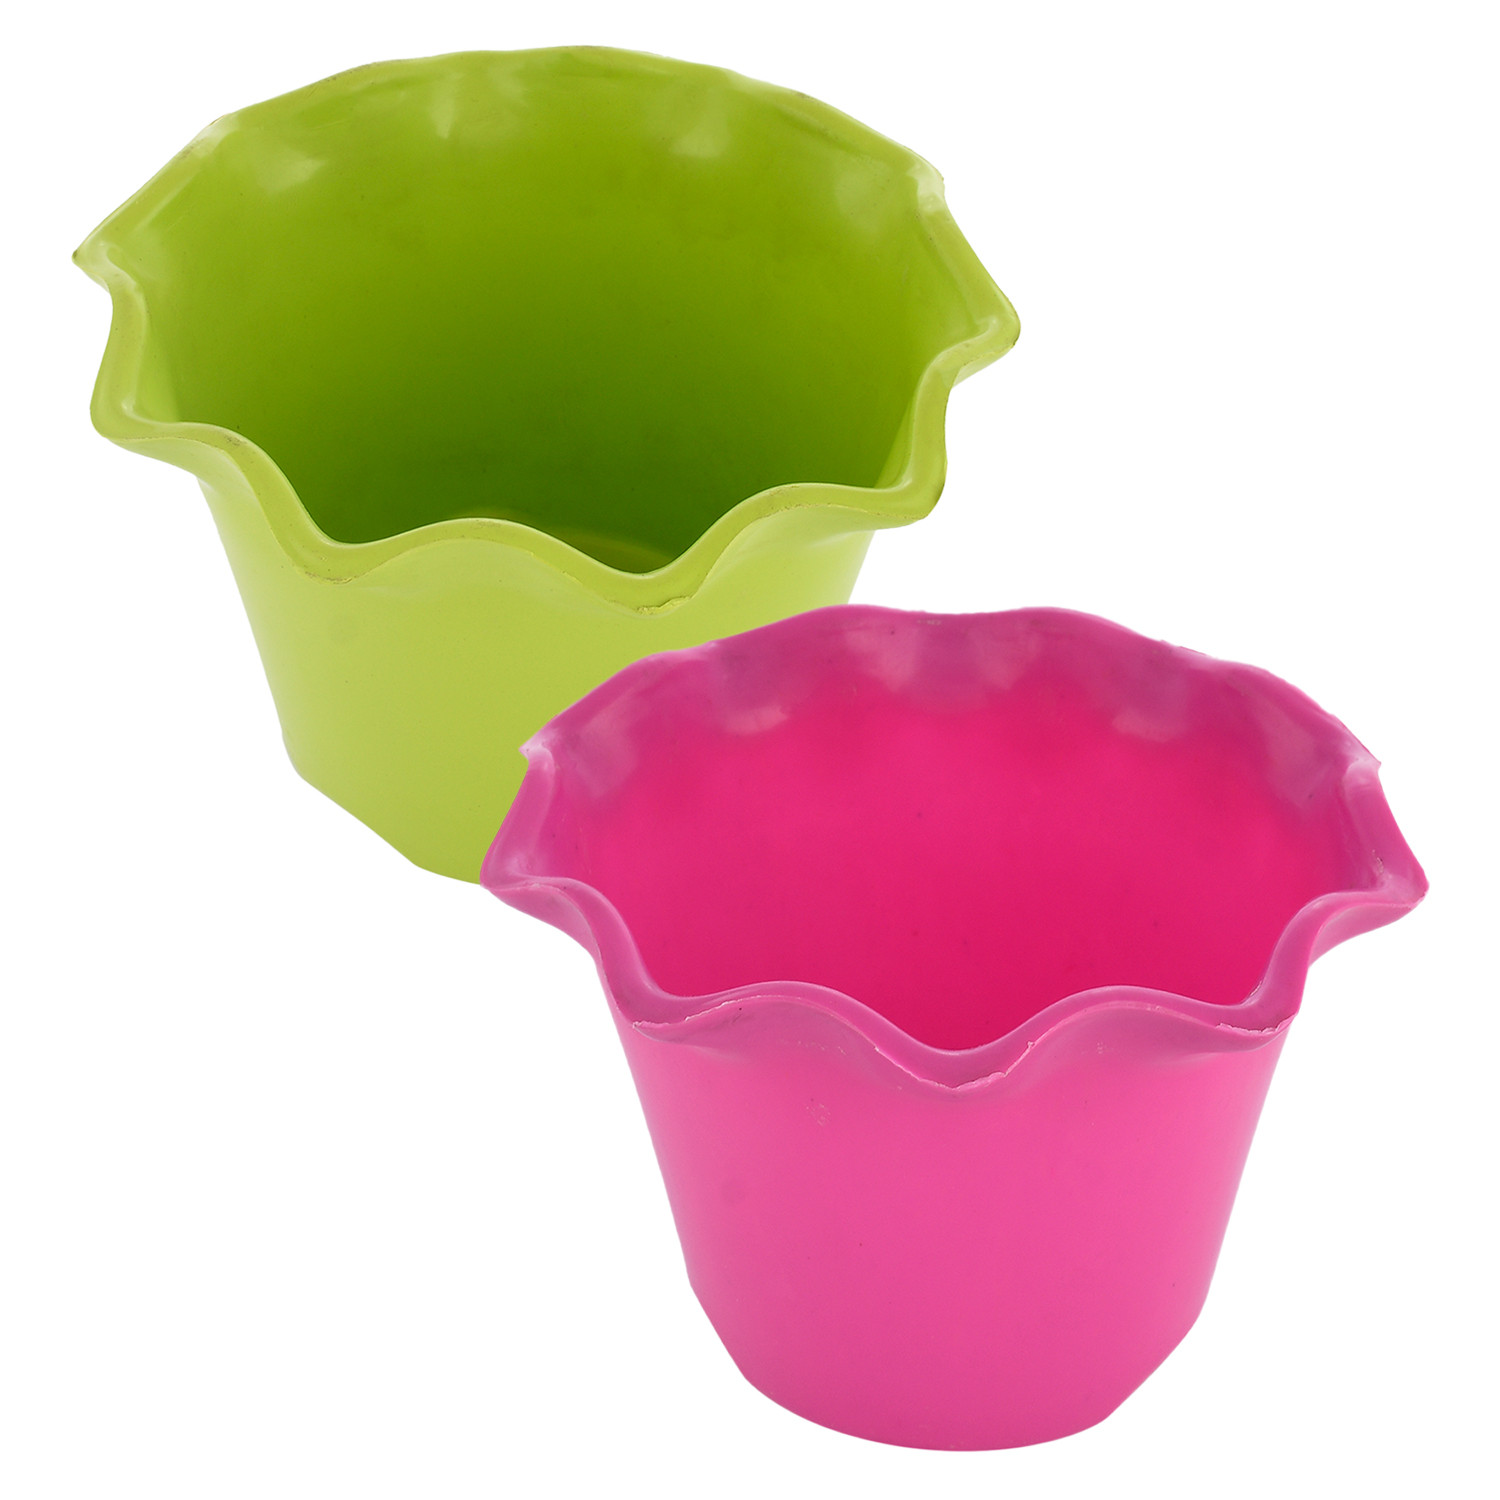 Kuber Industries Blossom Flower Pot|Durable Plastic Flower Pots|Planters for Home Décor|Garden|Living Room|Balcony|Pack of 2 (Pink & Green)